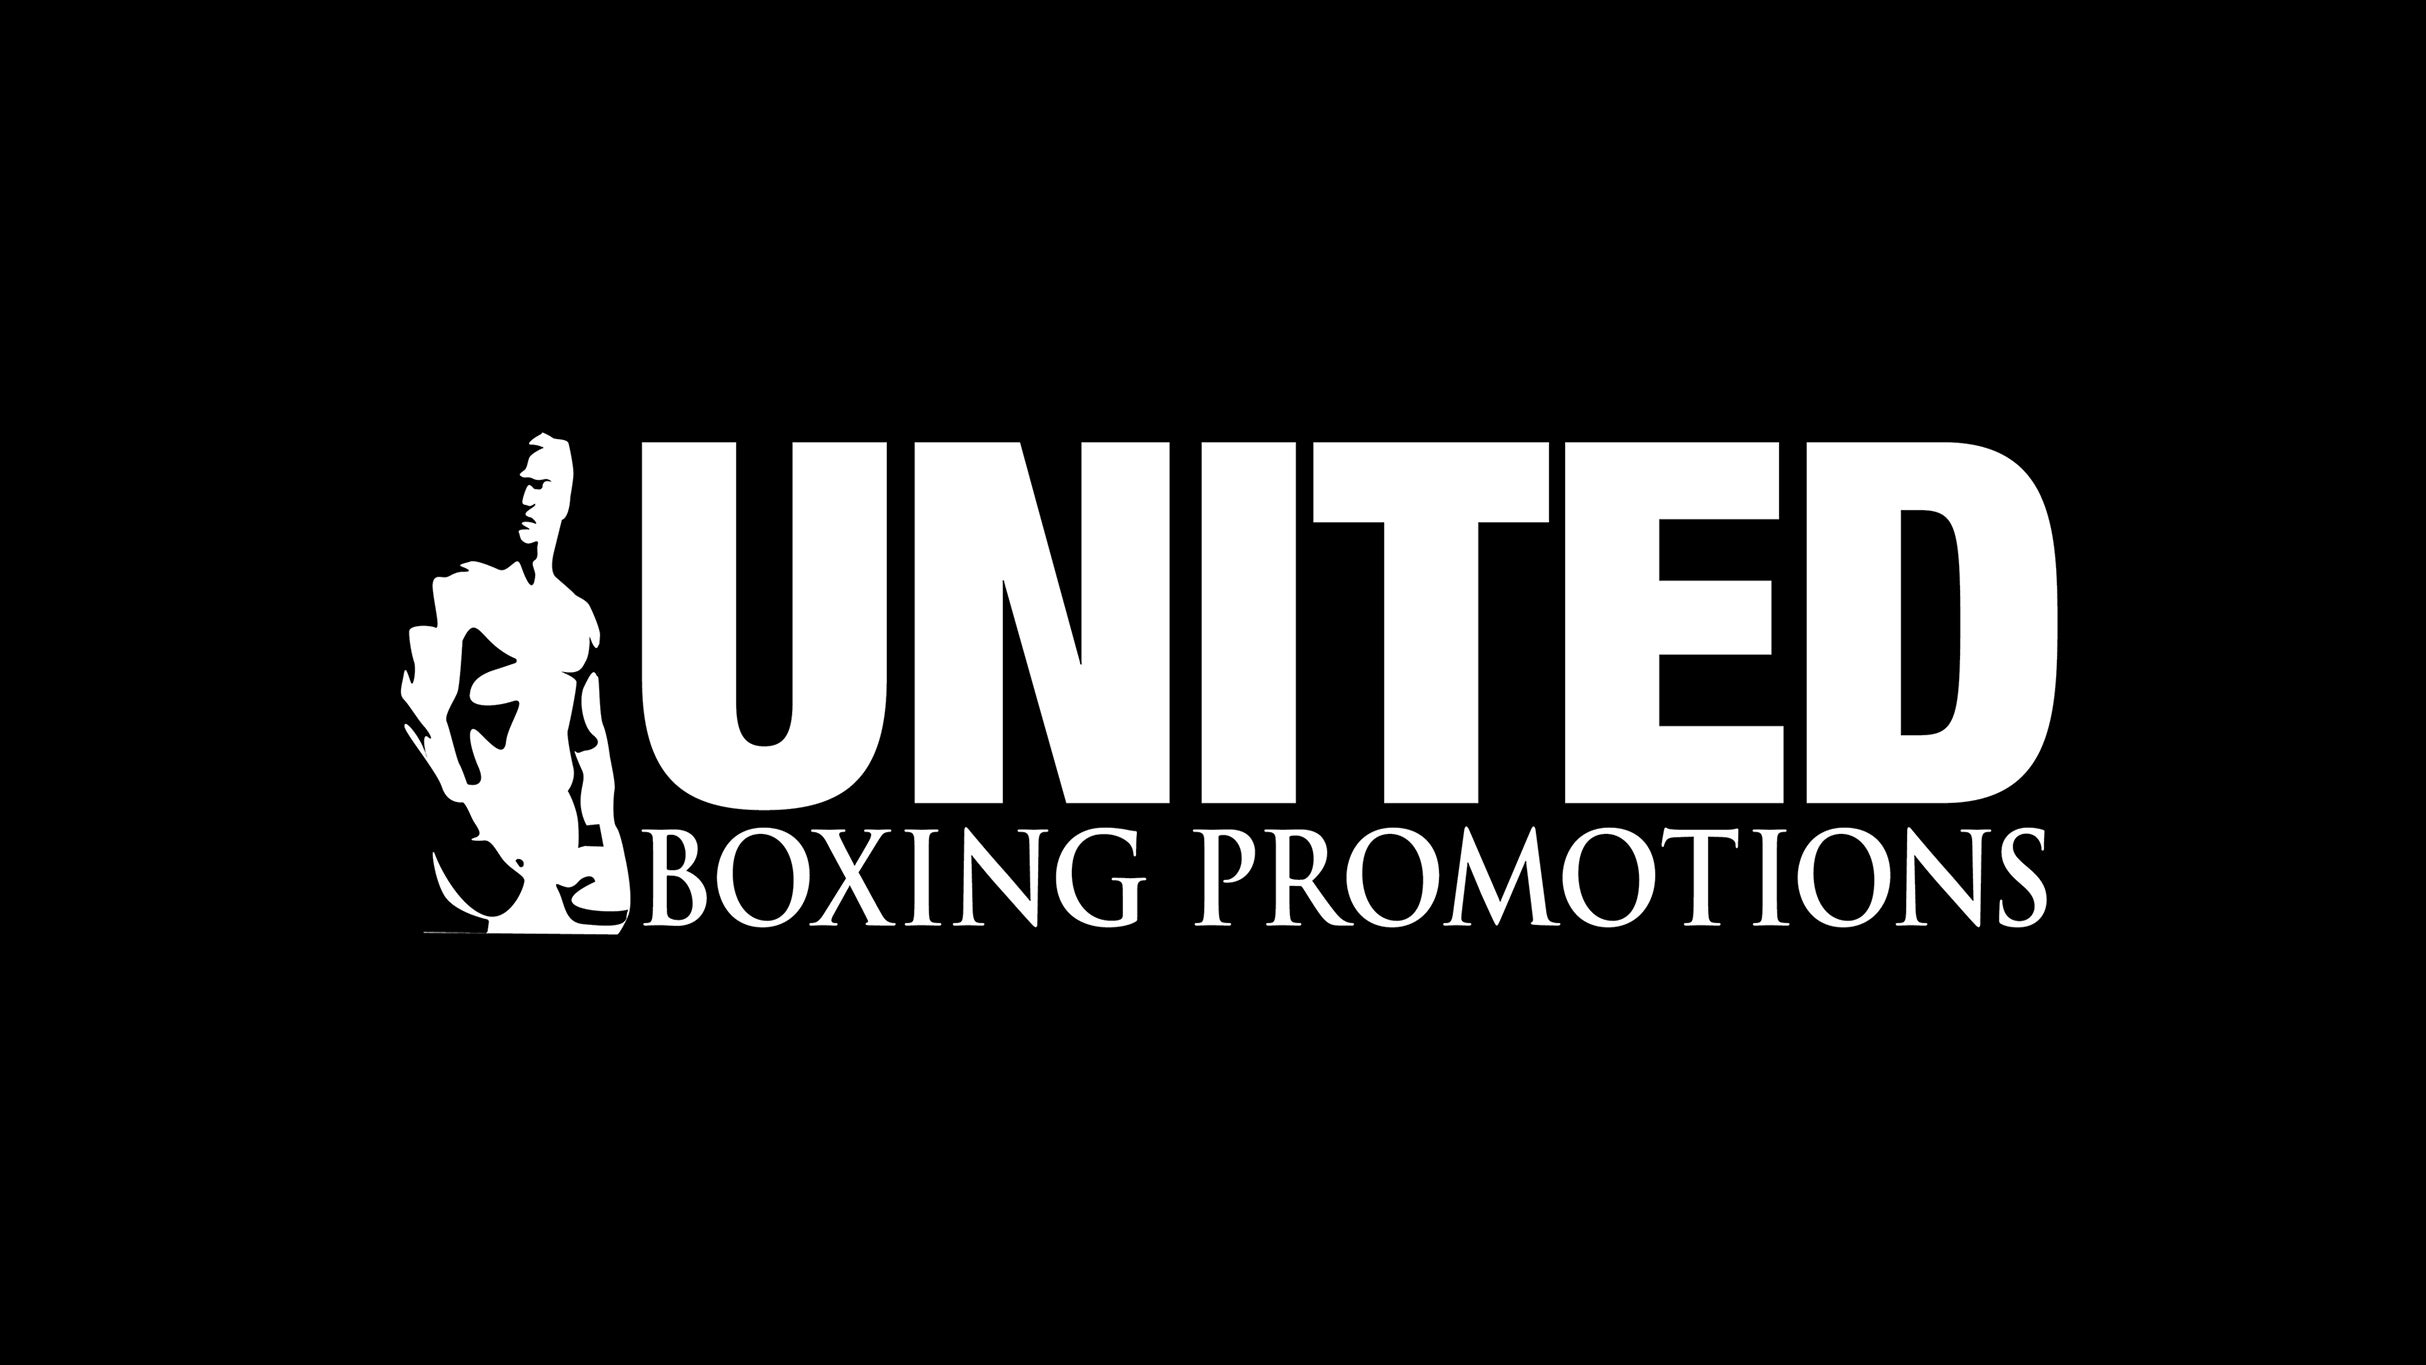 United Boxing Promotions Presents: Championship Boxing  in Toronto promo photo for Me + 3 Promotional  presale offer code